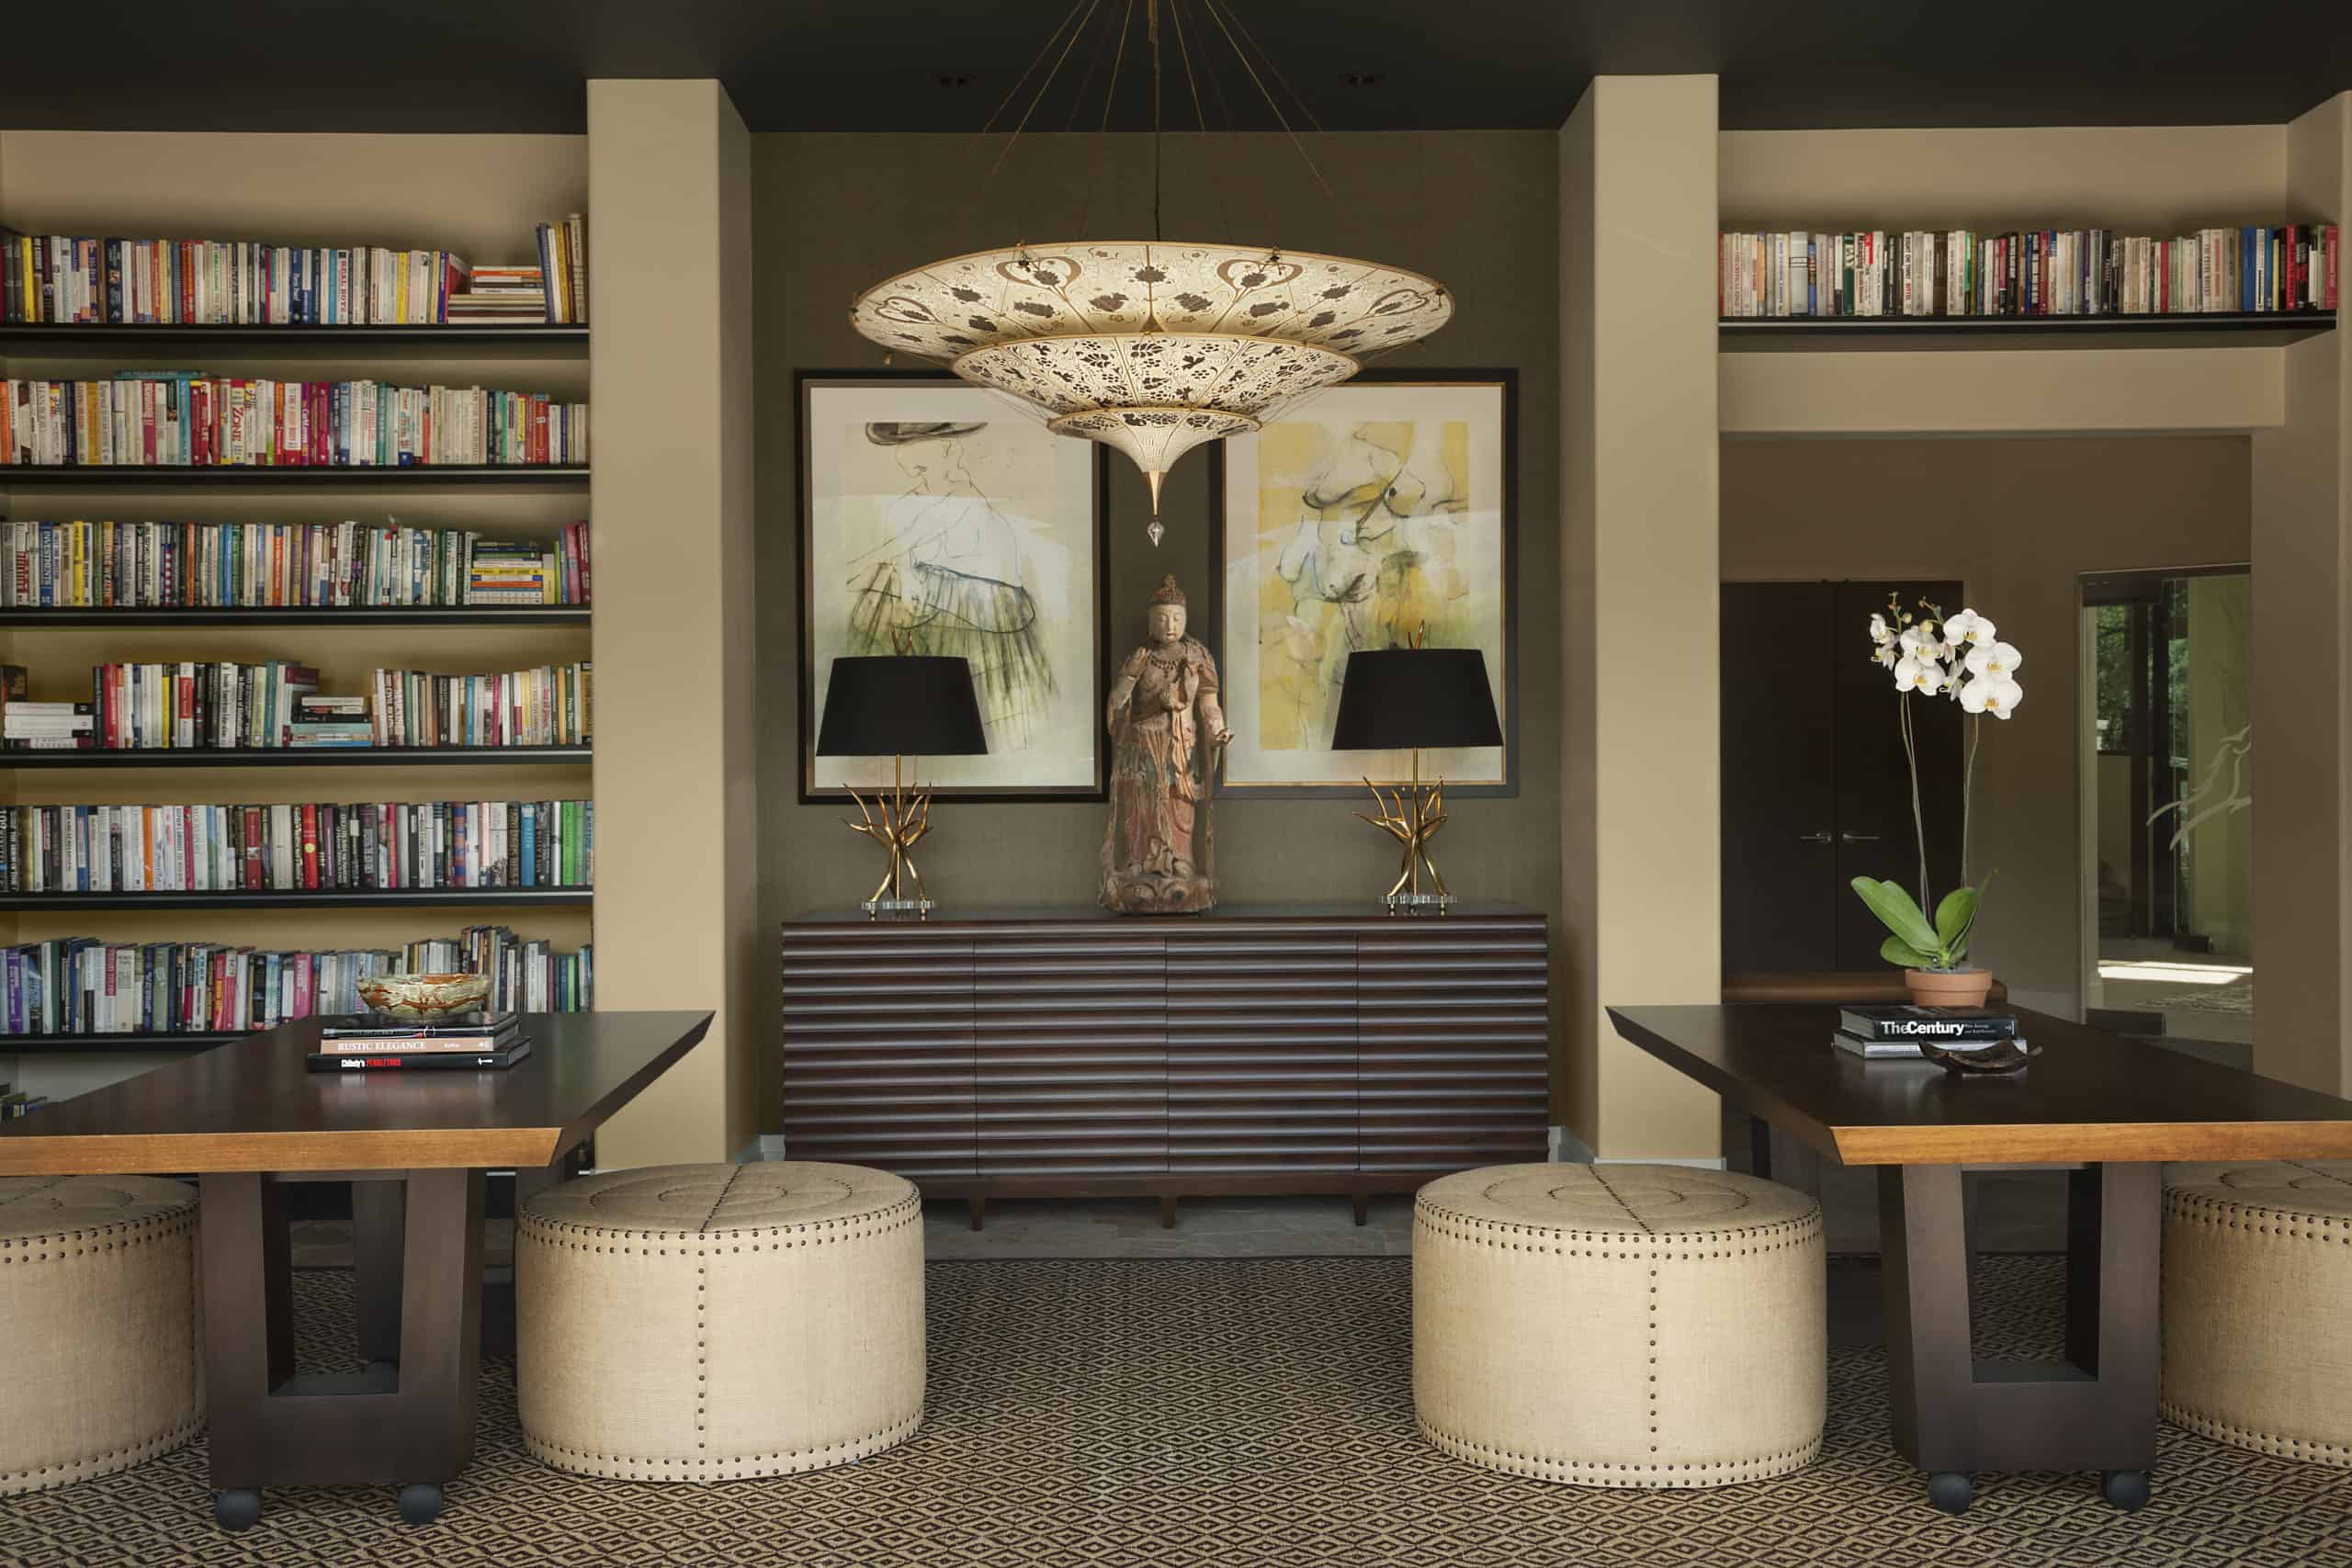 Multi-purpose dining room library with unique ottoman seating